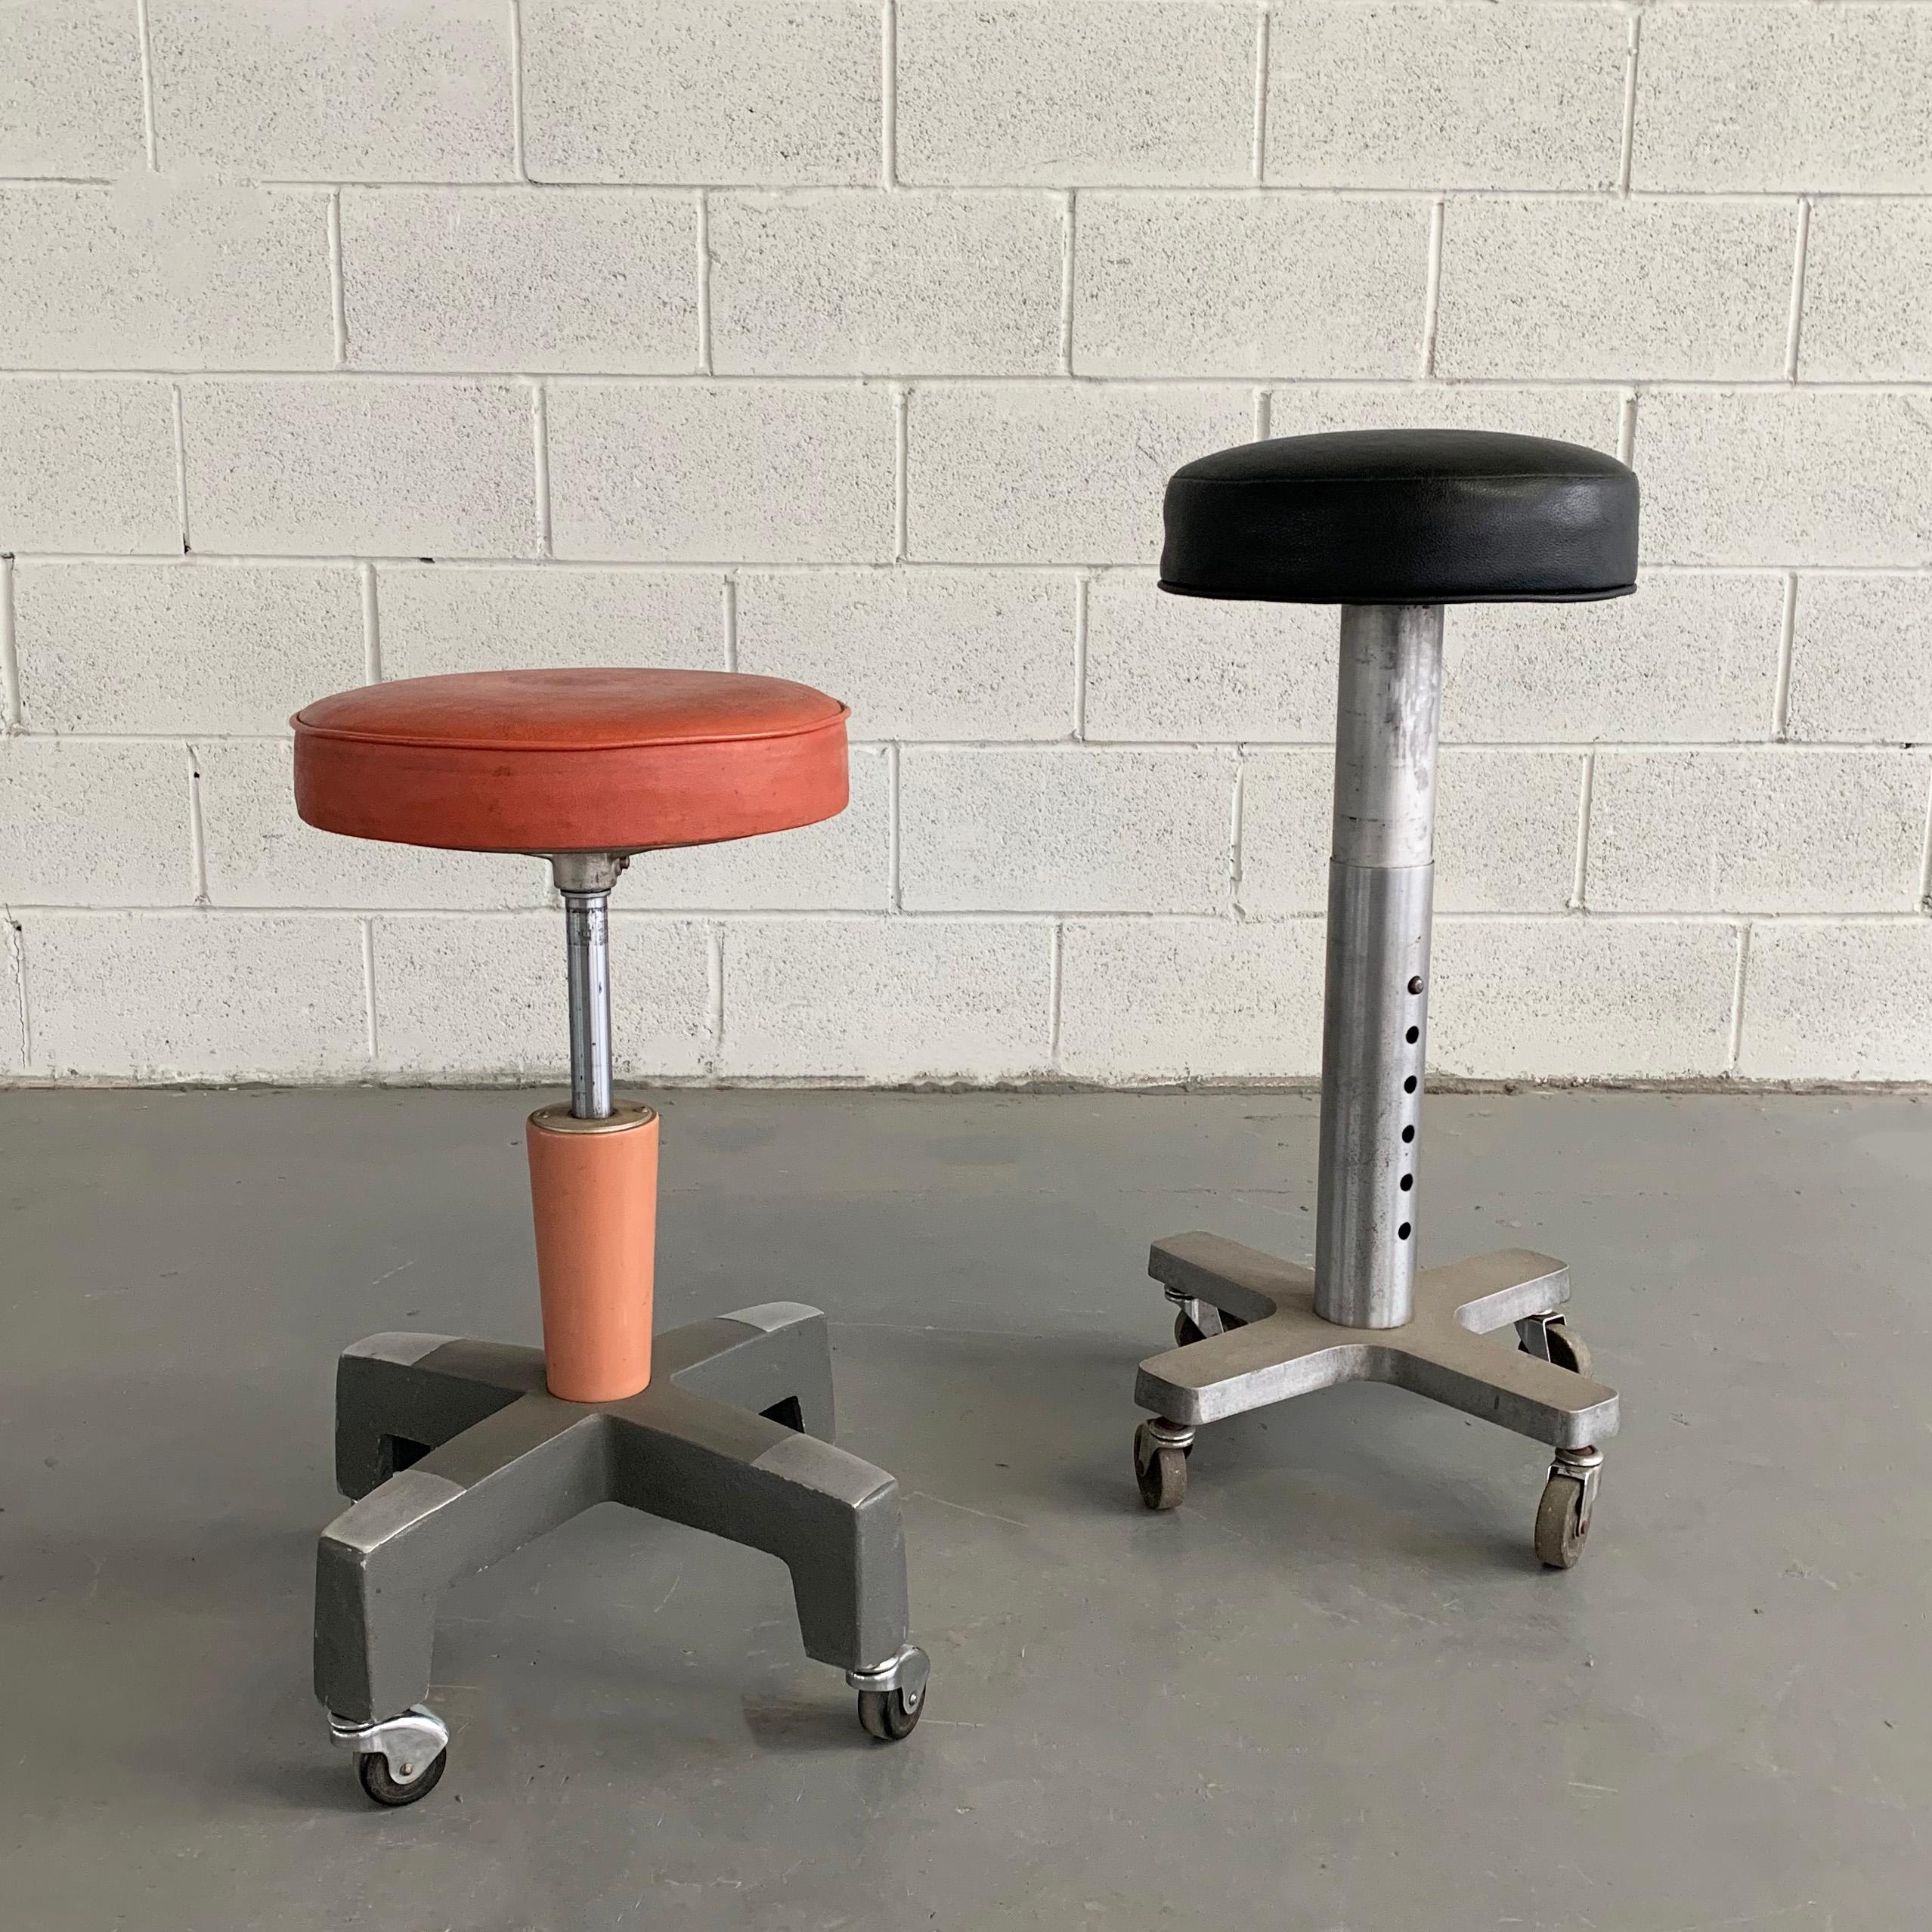 20th Century Industrial Enamel Rolling Adjustable Stool by American Optical Company For Sale